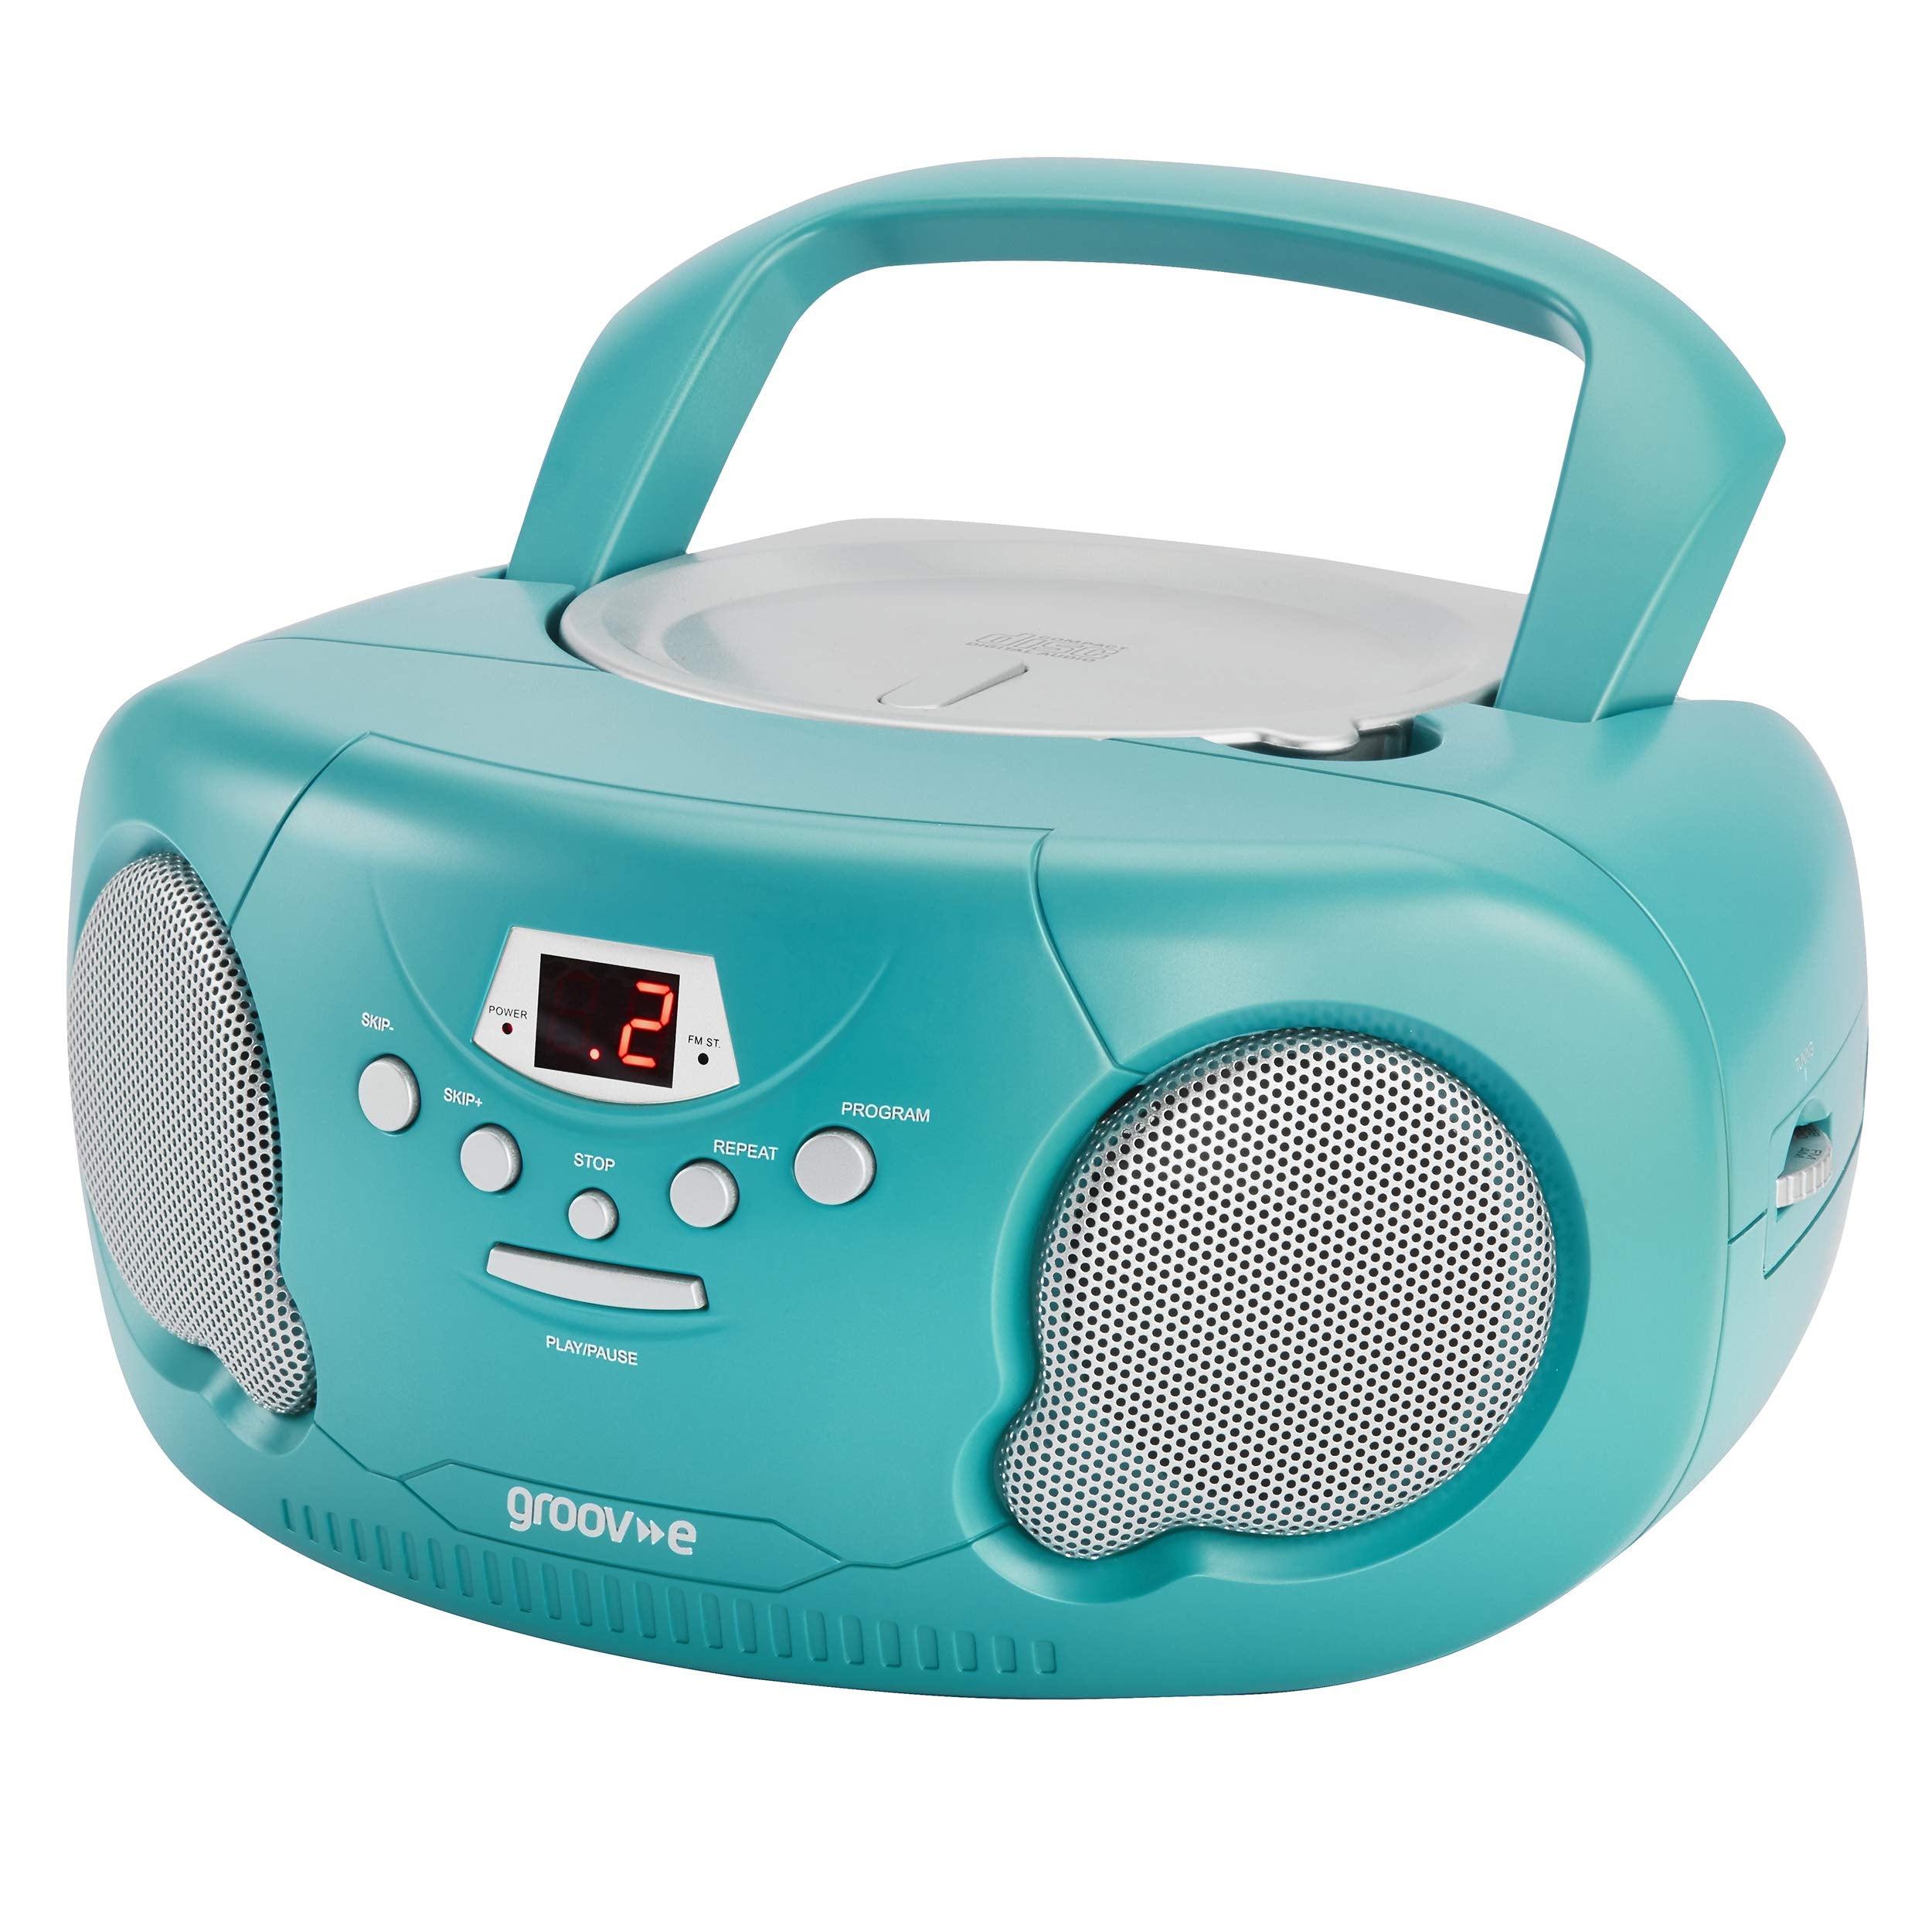 Groov-e GVPS733/TL Portable CD Player Boombox with AM/FM Radio, 3.5mm AUX Input, Headphone Jack, LED Display - Teal, 21.0 cm*23.0 cm*10.0 cm